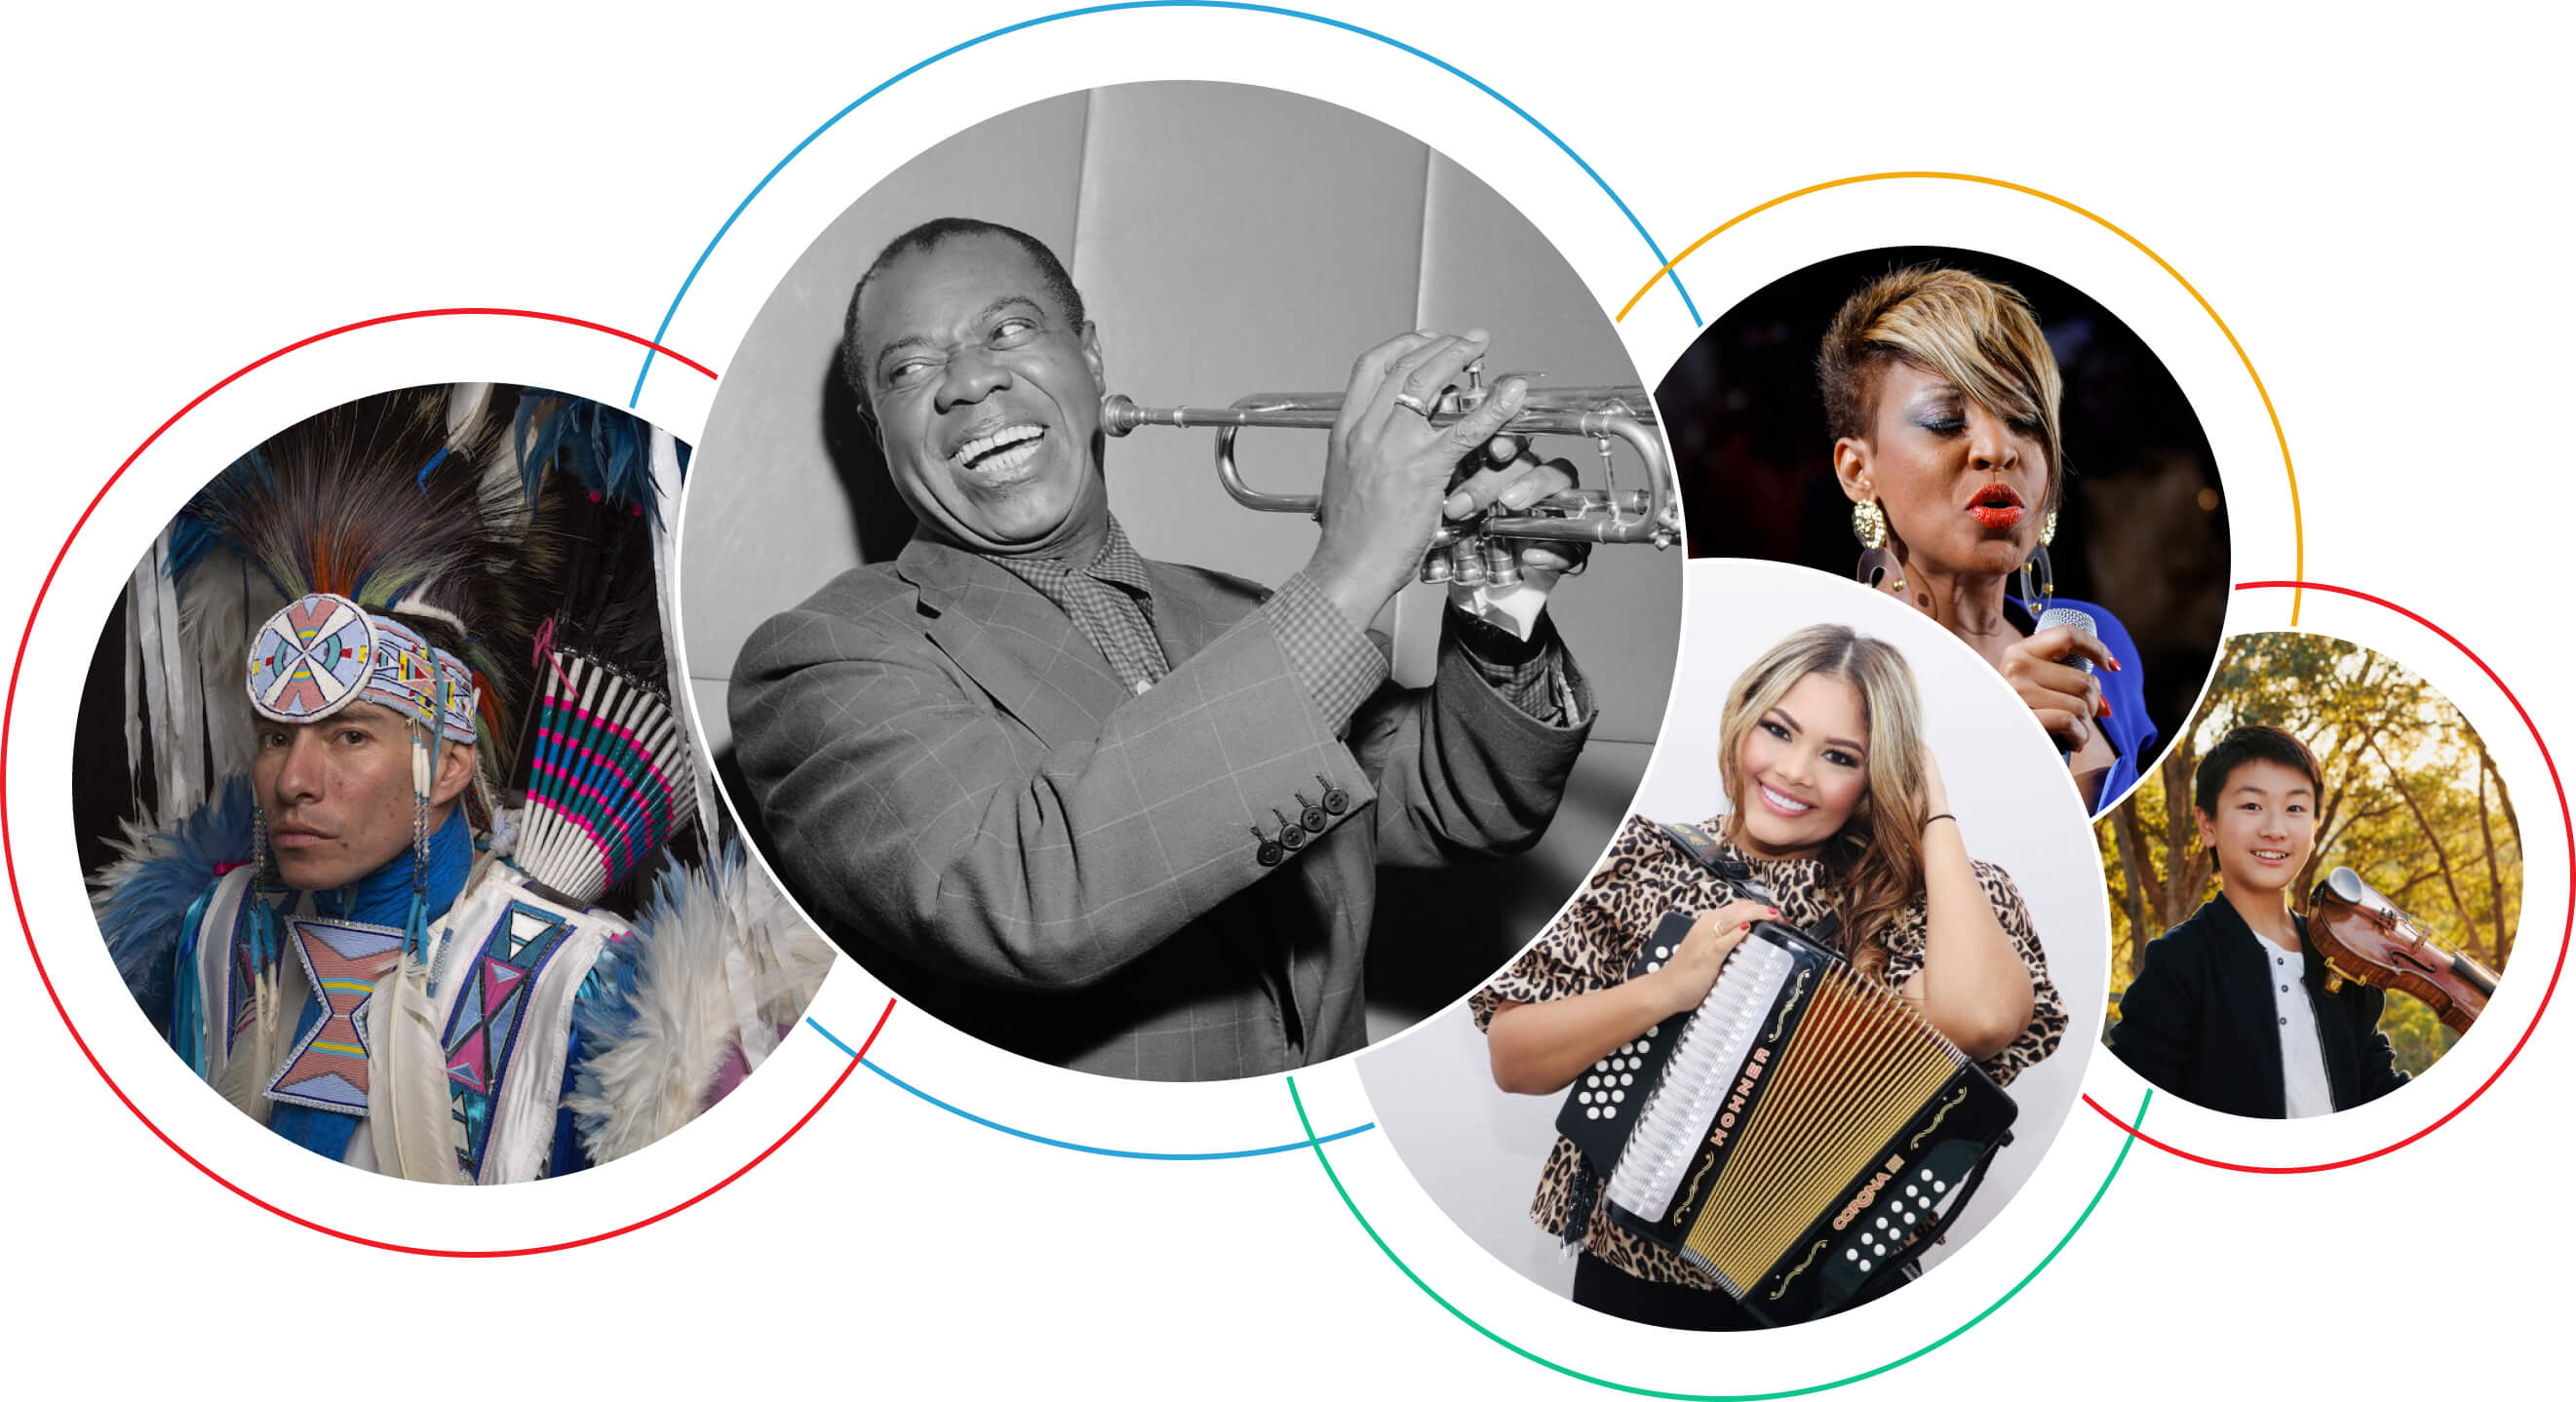 Collage of 5 images showing various musicans, including Louis Armstrong, a Native American, a African American singer, a violinist, and an accordionist.